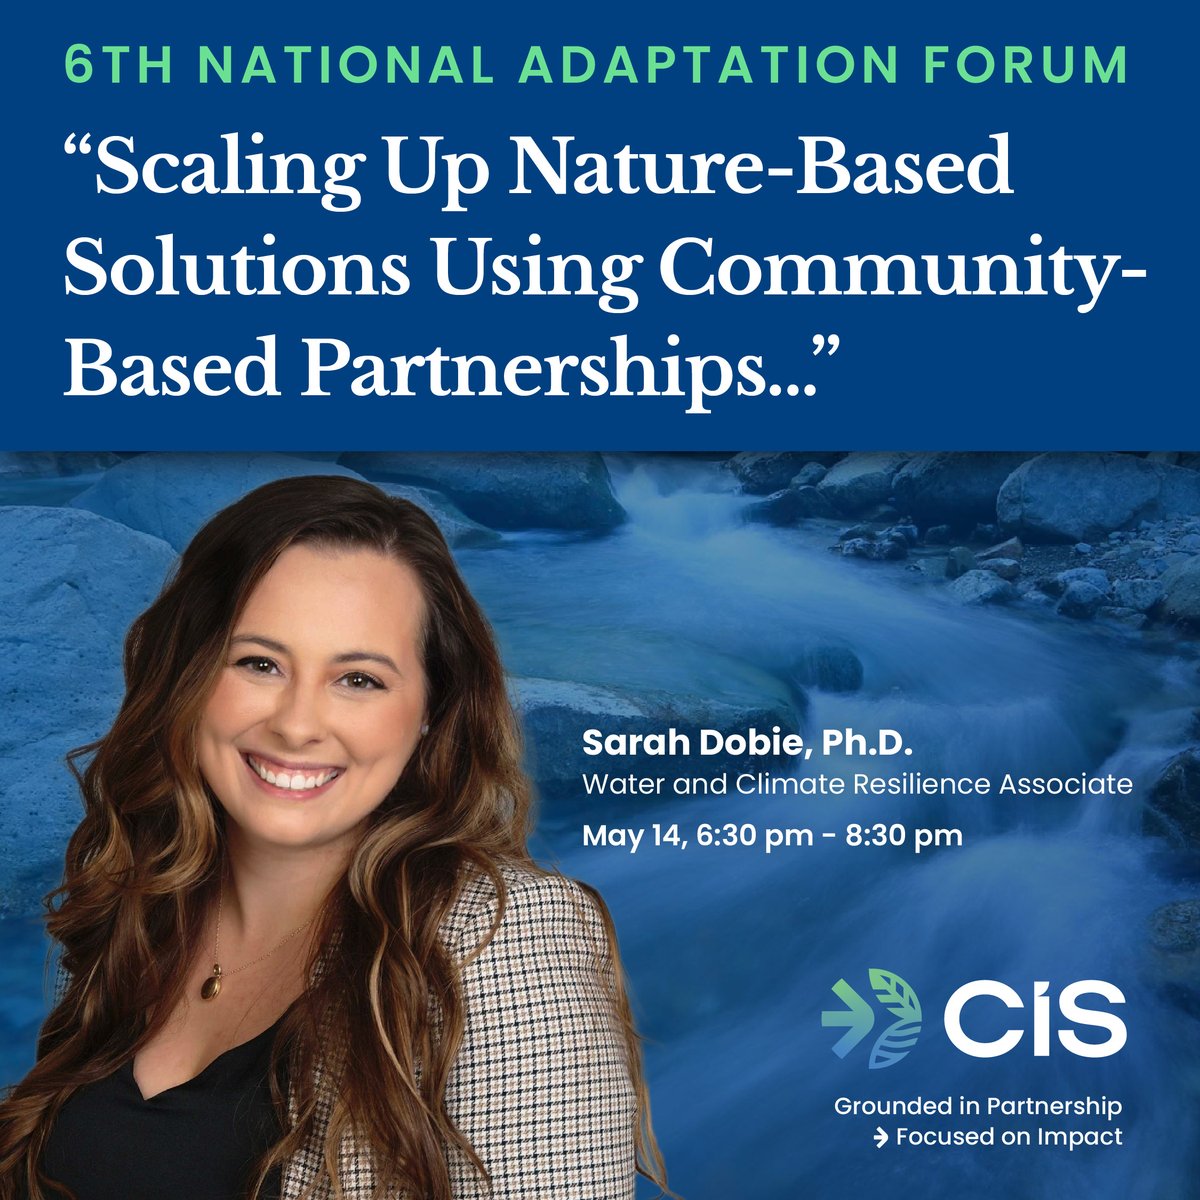 On May 14, 2024, at the 6th @AdaptationForum in Saint Paul (#Minnesota), Team @Naturebased_CIS's  Sarah Dobie, Ph.D. will be presenting “Scaling Up Nature-Based Solutions Using Community-Based Partnerships: A Case Study of the Greater Milwaukee Area' co-authored with Sri…